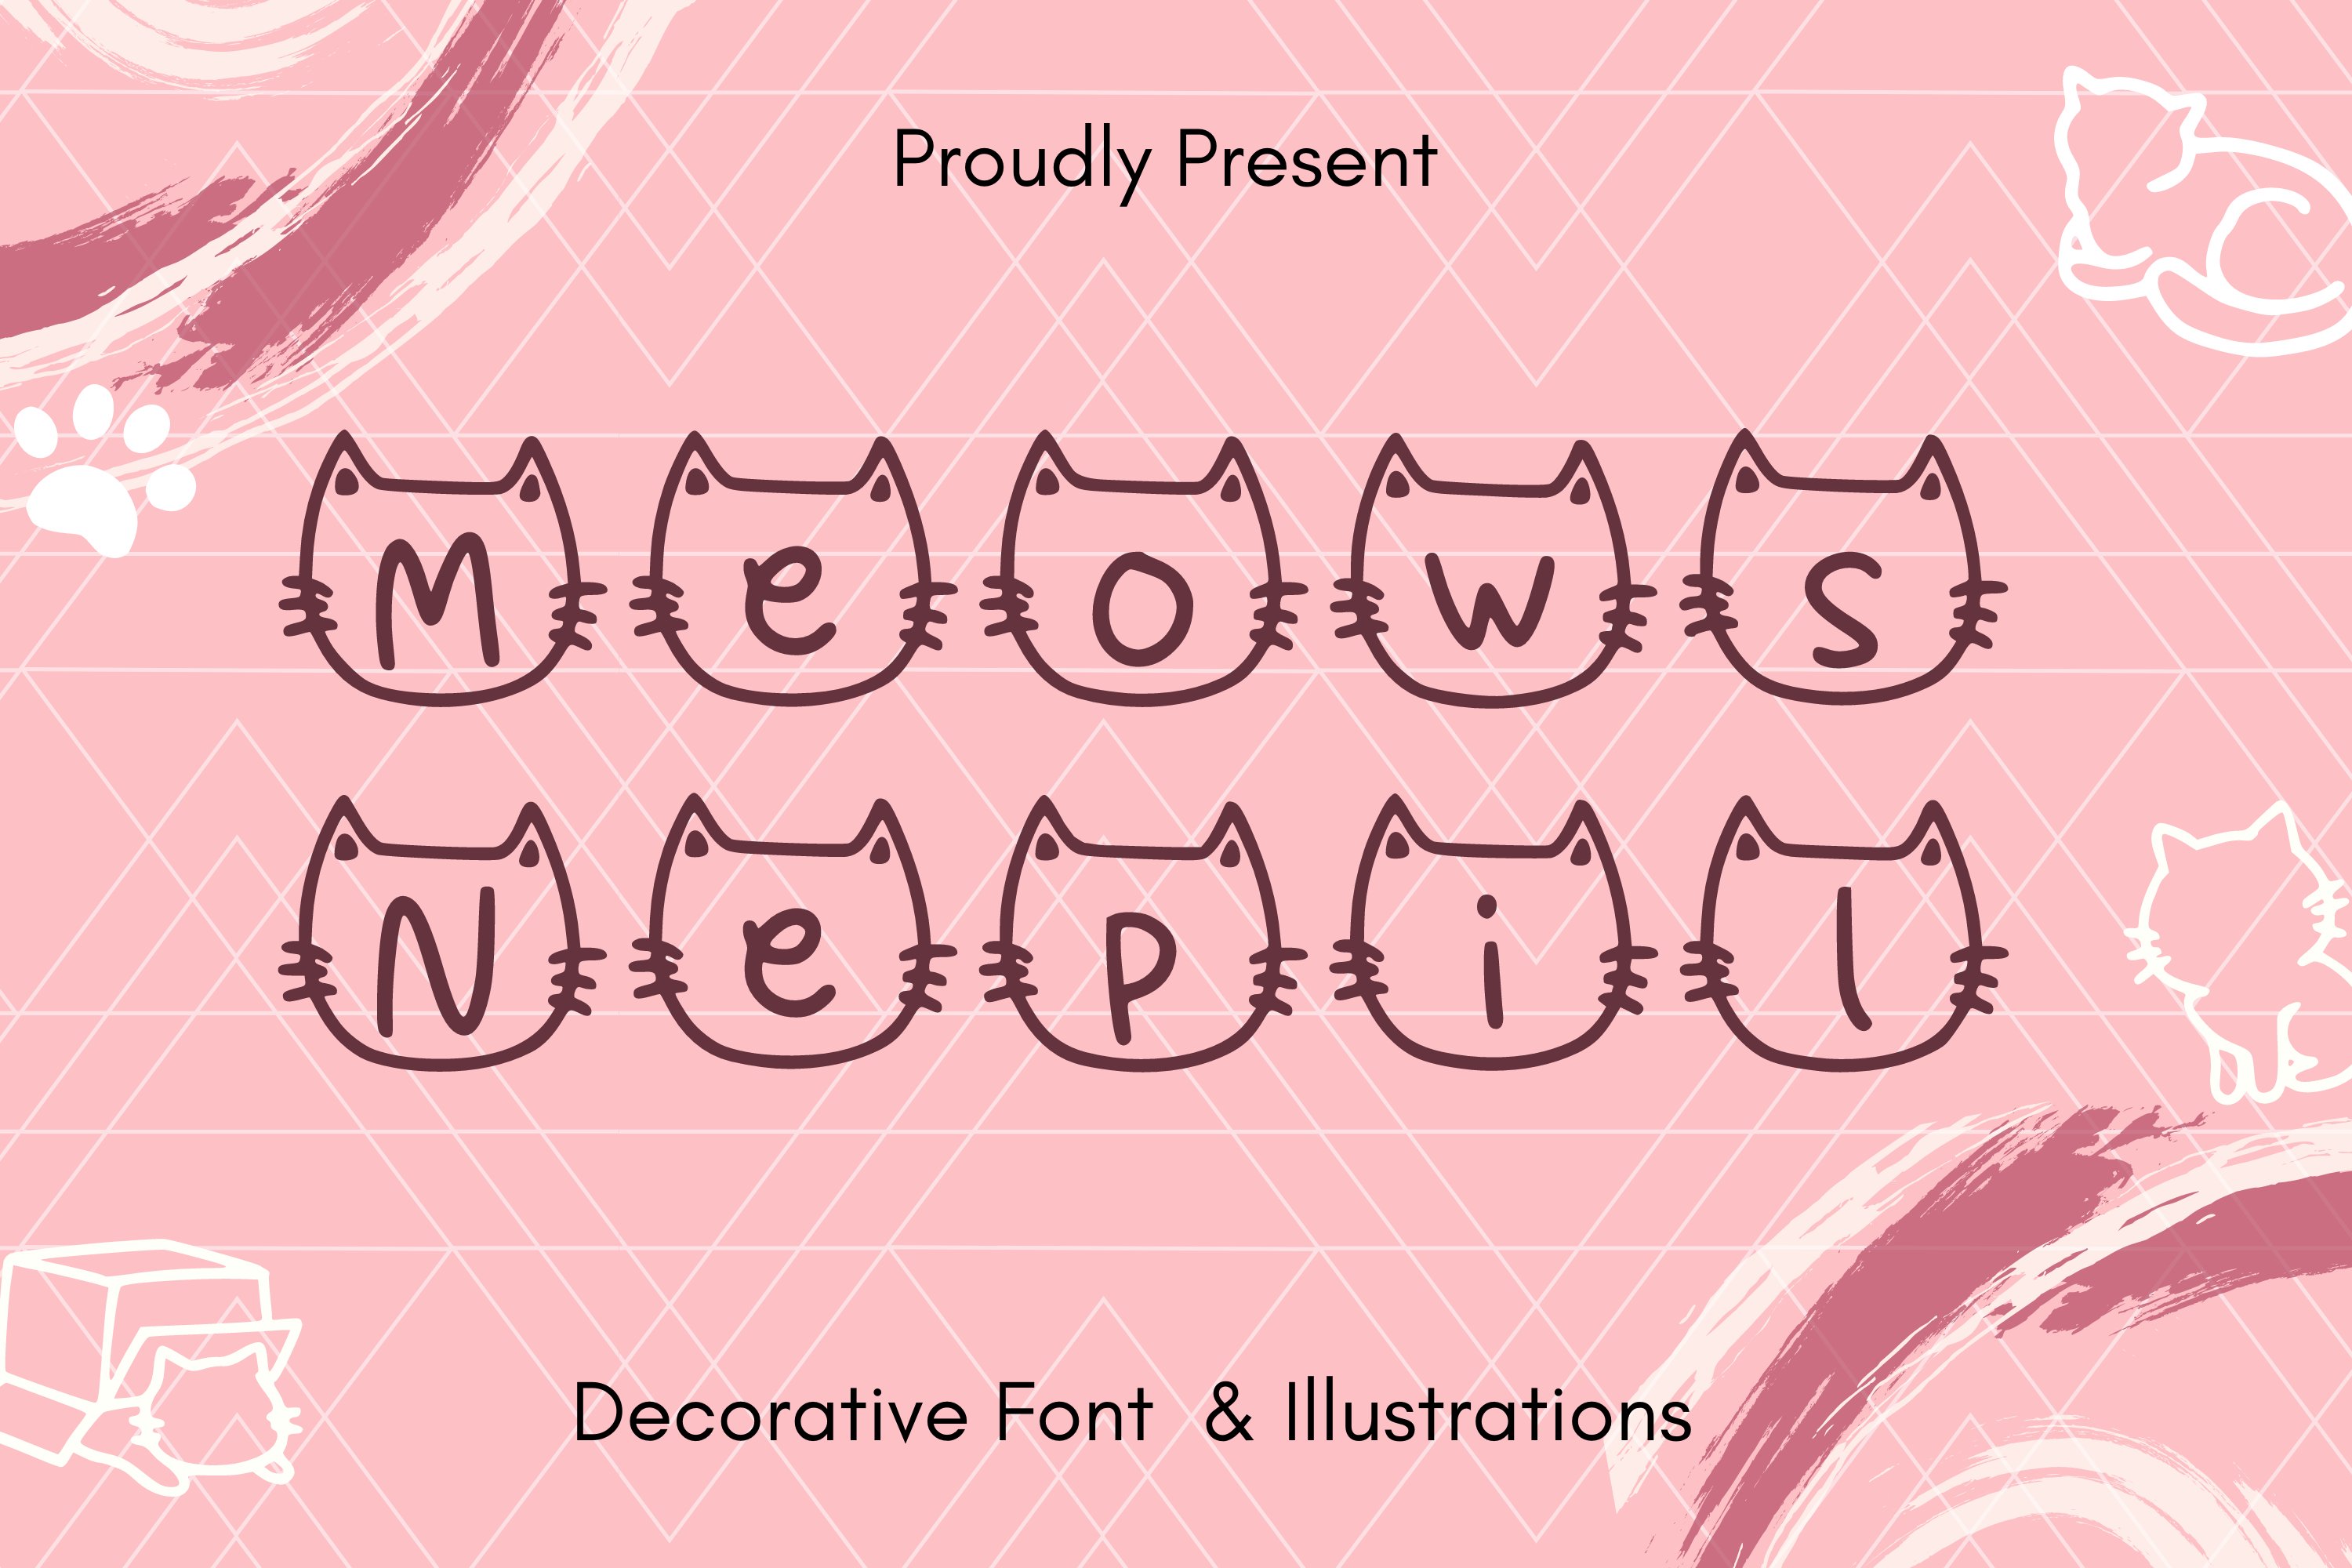 Meows Nepil Font cover image.